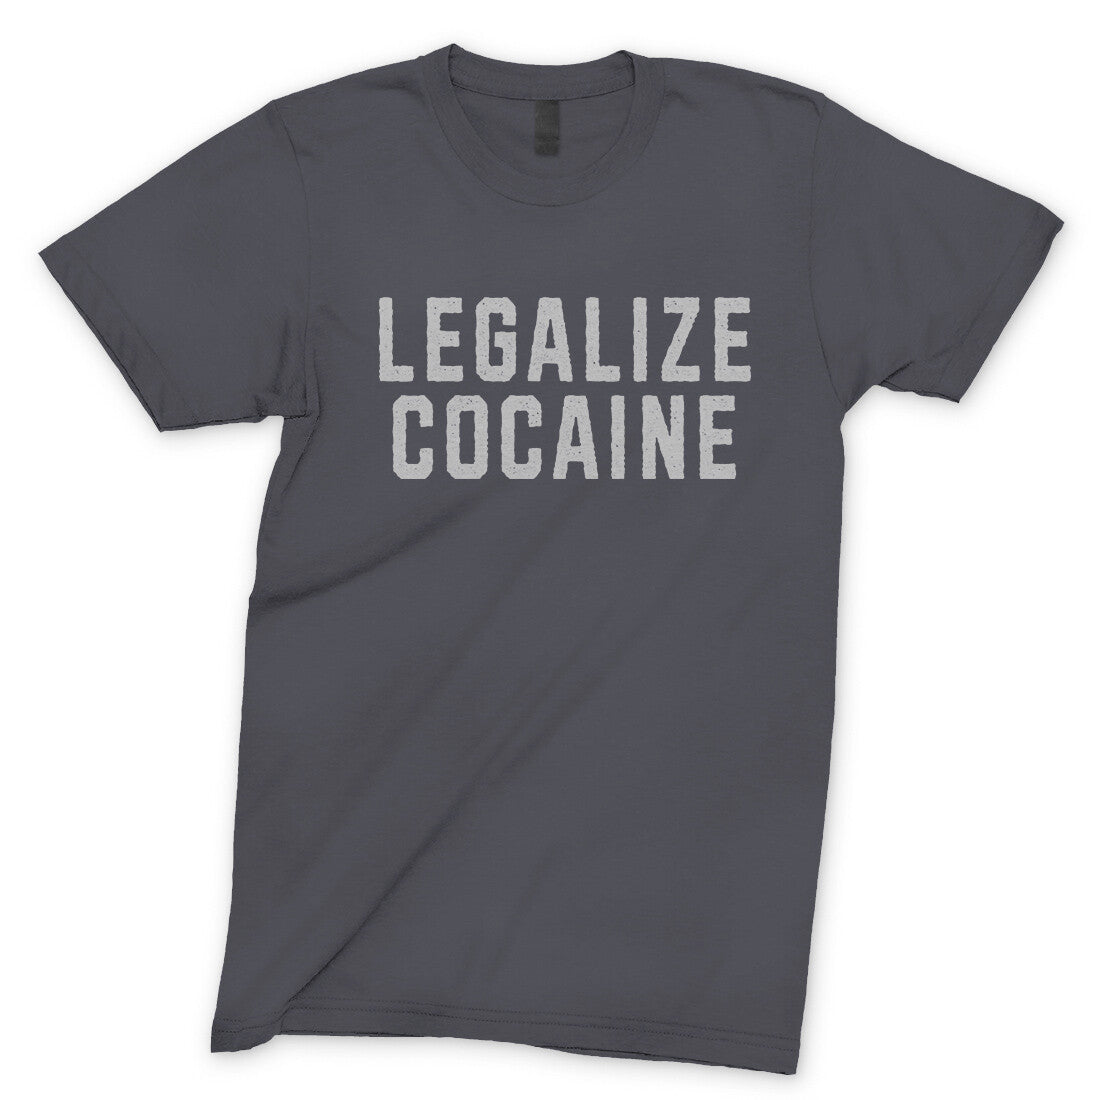 Legalize Cocaine in Charcoal Color